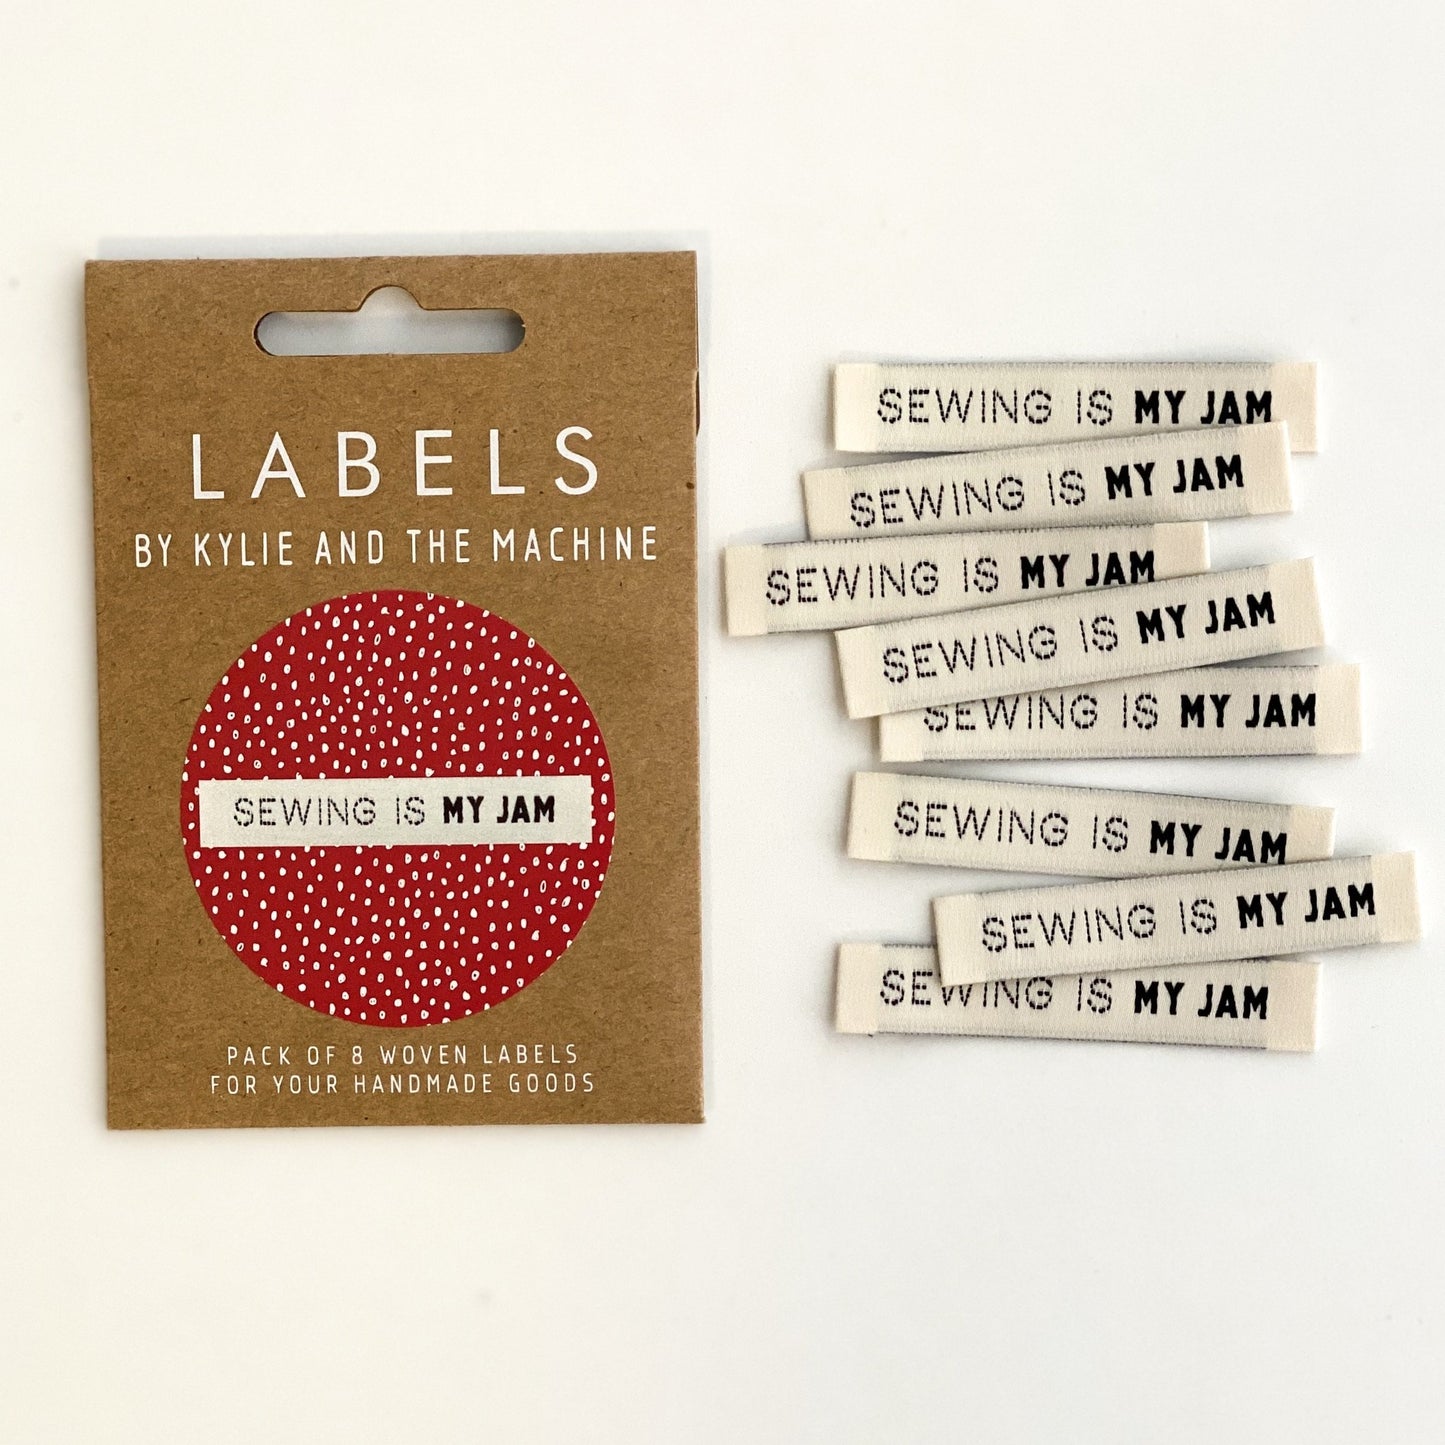 Kylie and the Machine “Sewing Is My Jam" Woven Labels 8 Pack